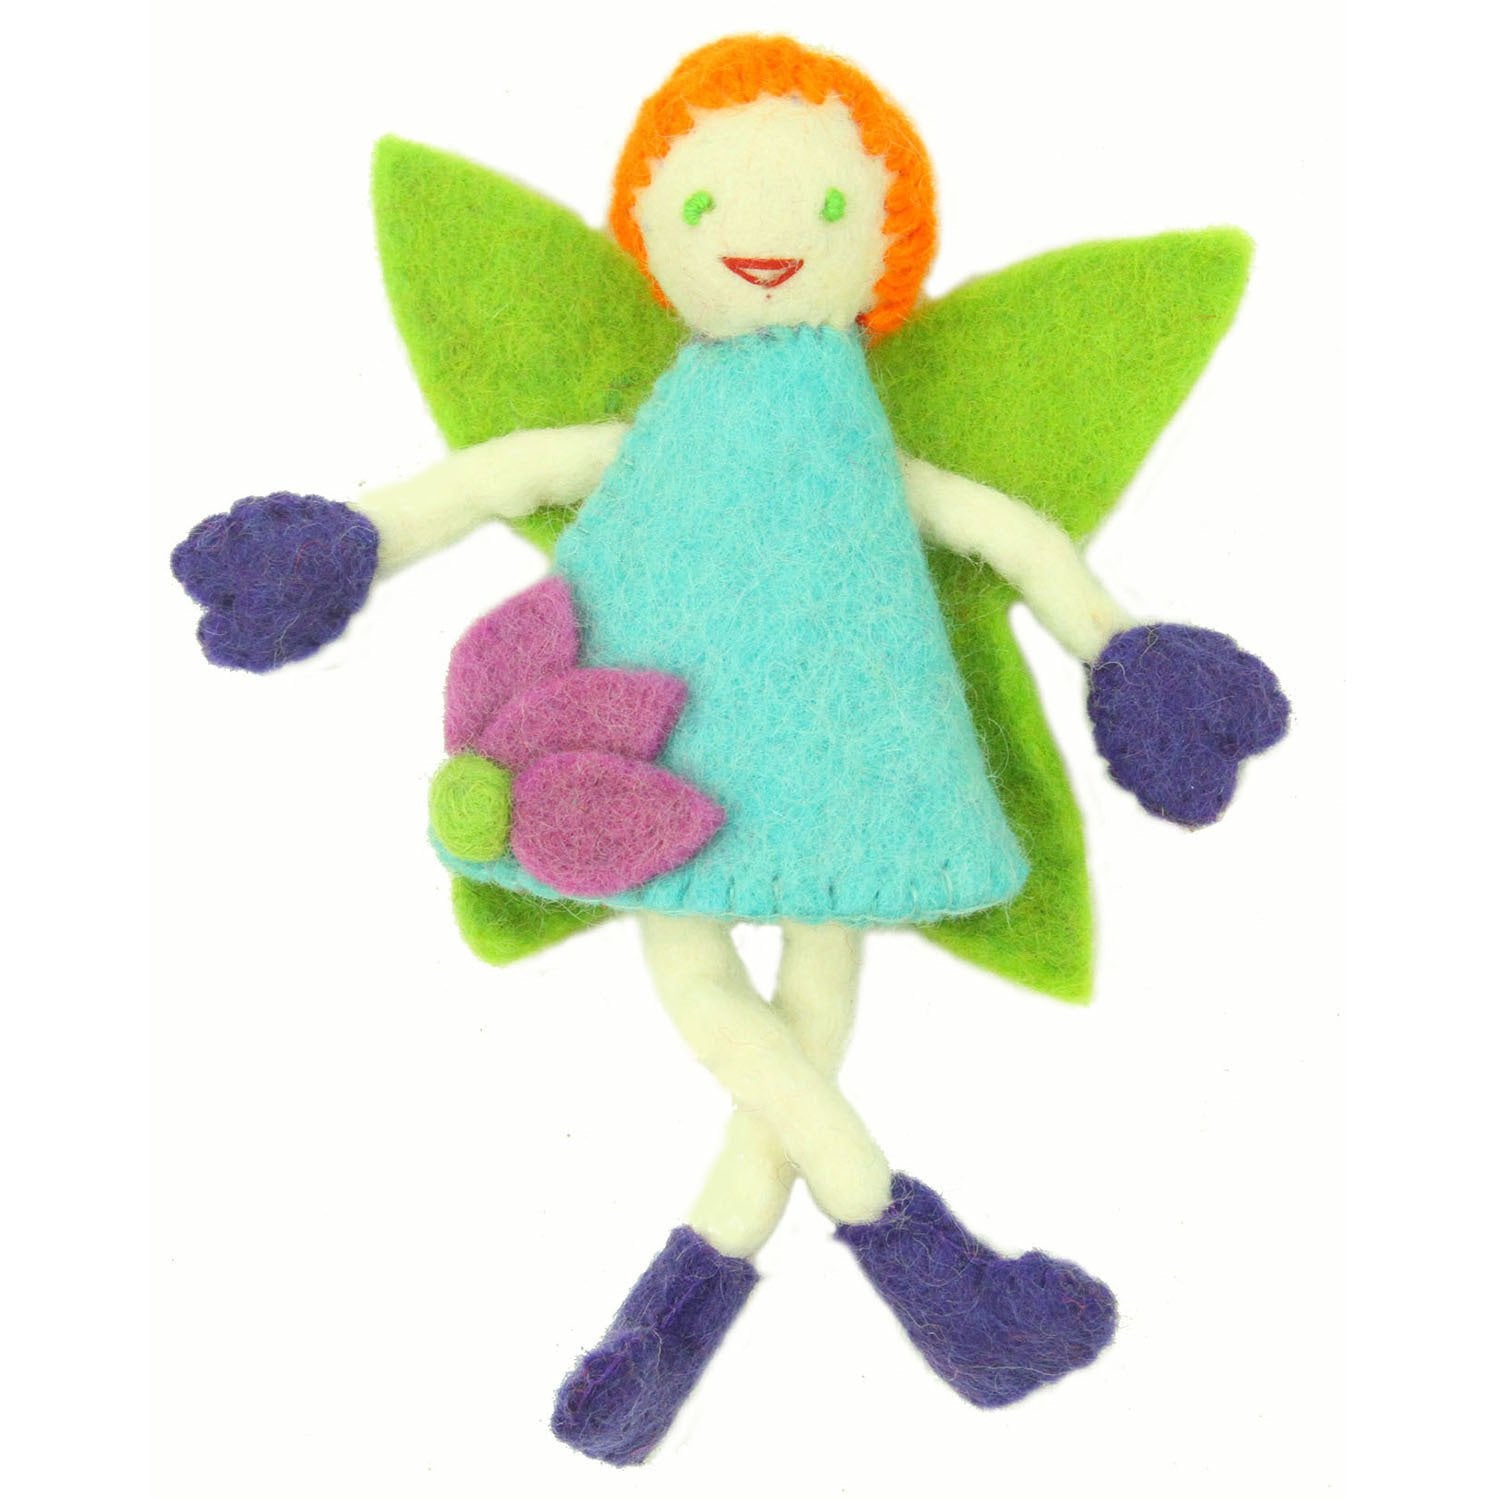 Hand Felted Tooth Fairy Pillow - Redhead with Blue Dress - Global Groove - Global Groove Life